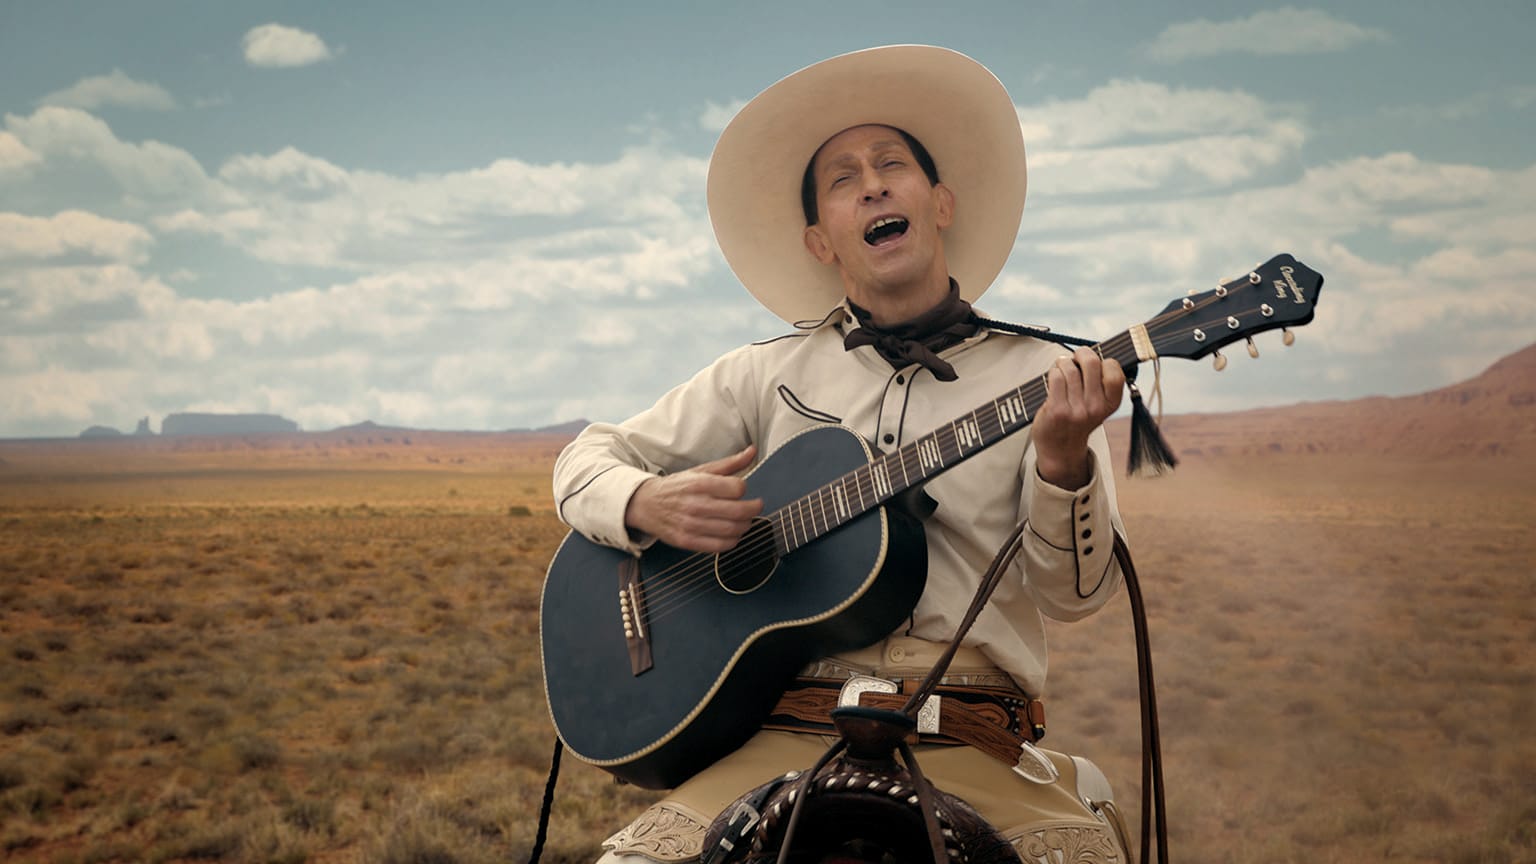 Recensie The Ballad of Buster Scruggs